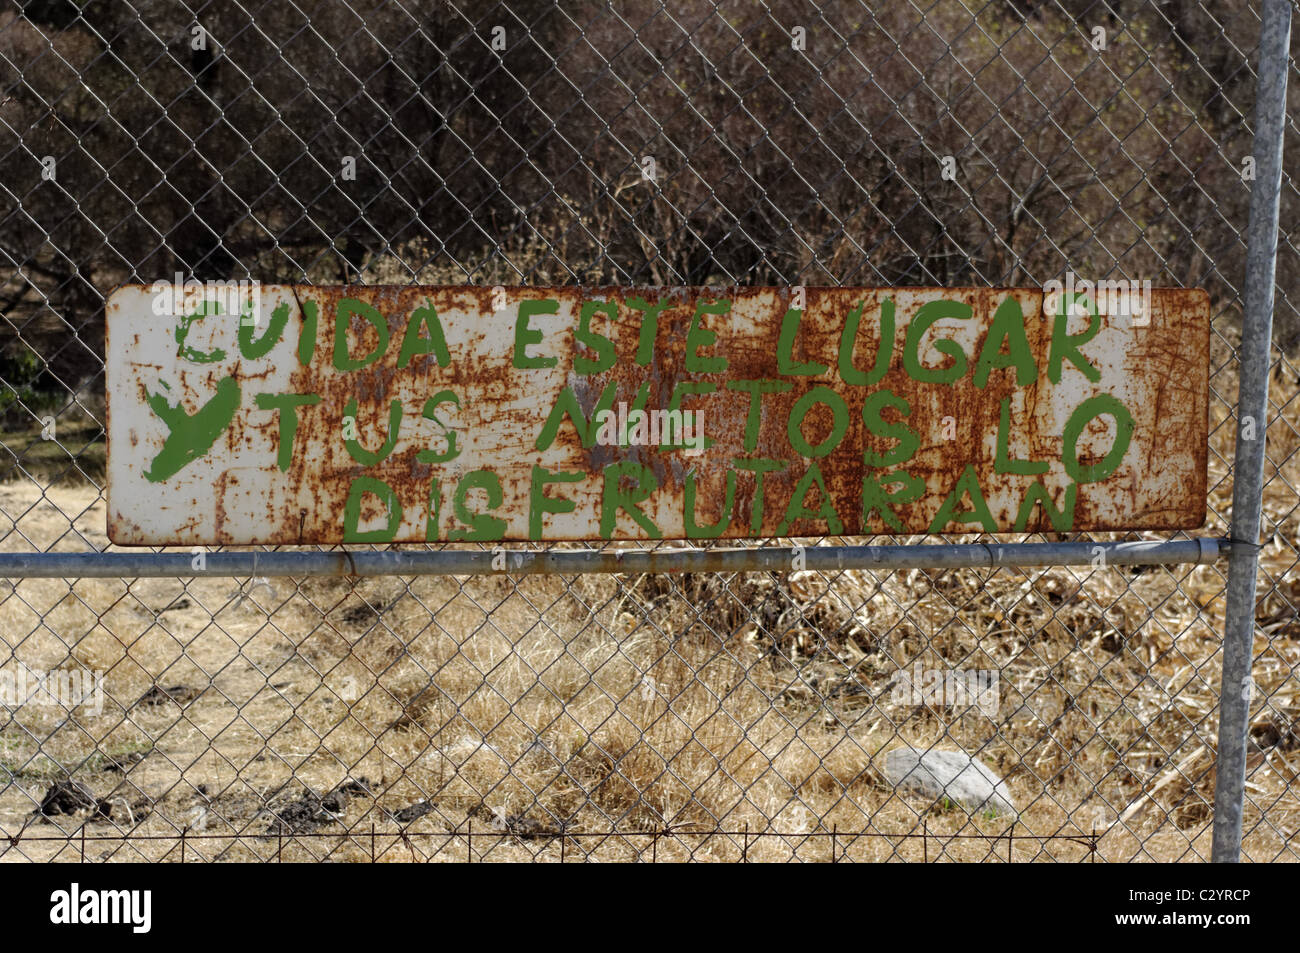 Old and rusted signpost that says in Spanish: 'Take care of this place and your grandsons will enjoy it' Stock Photo